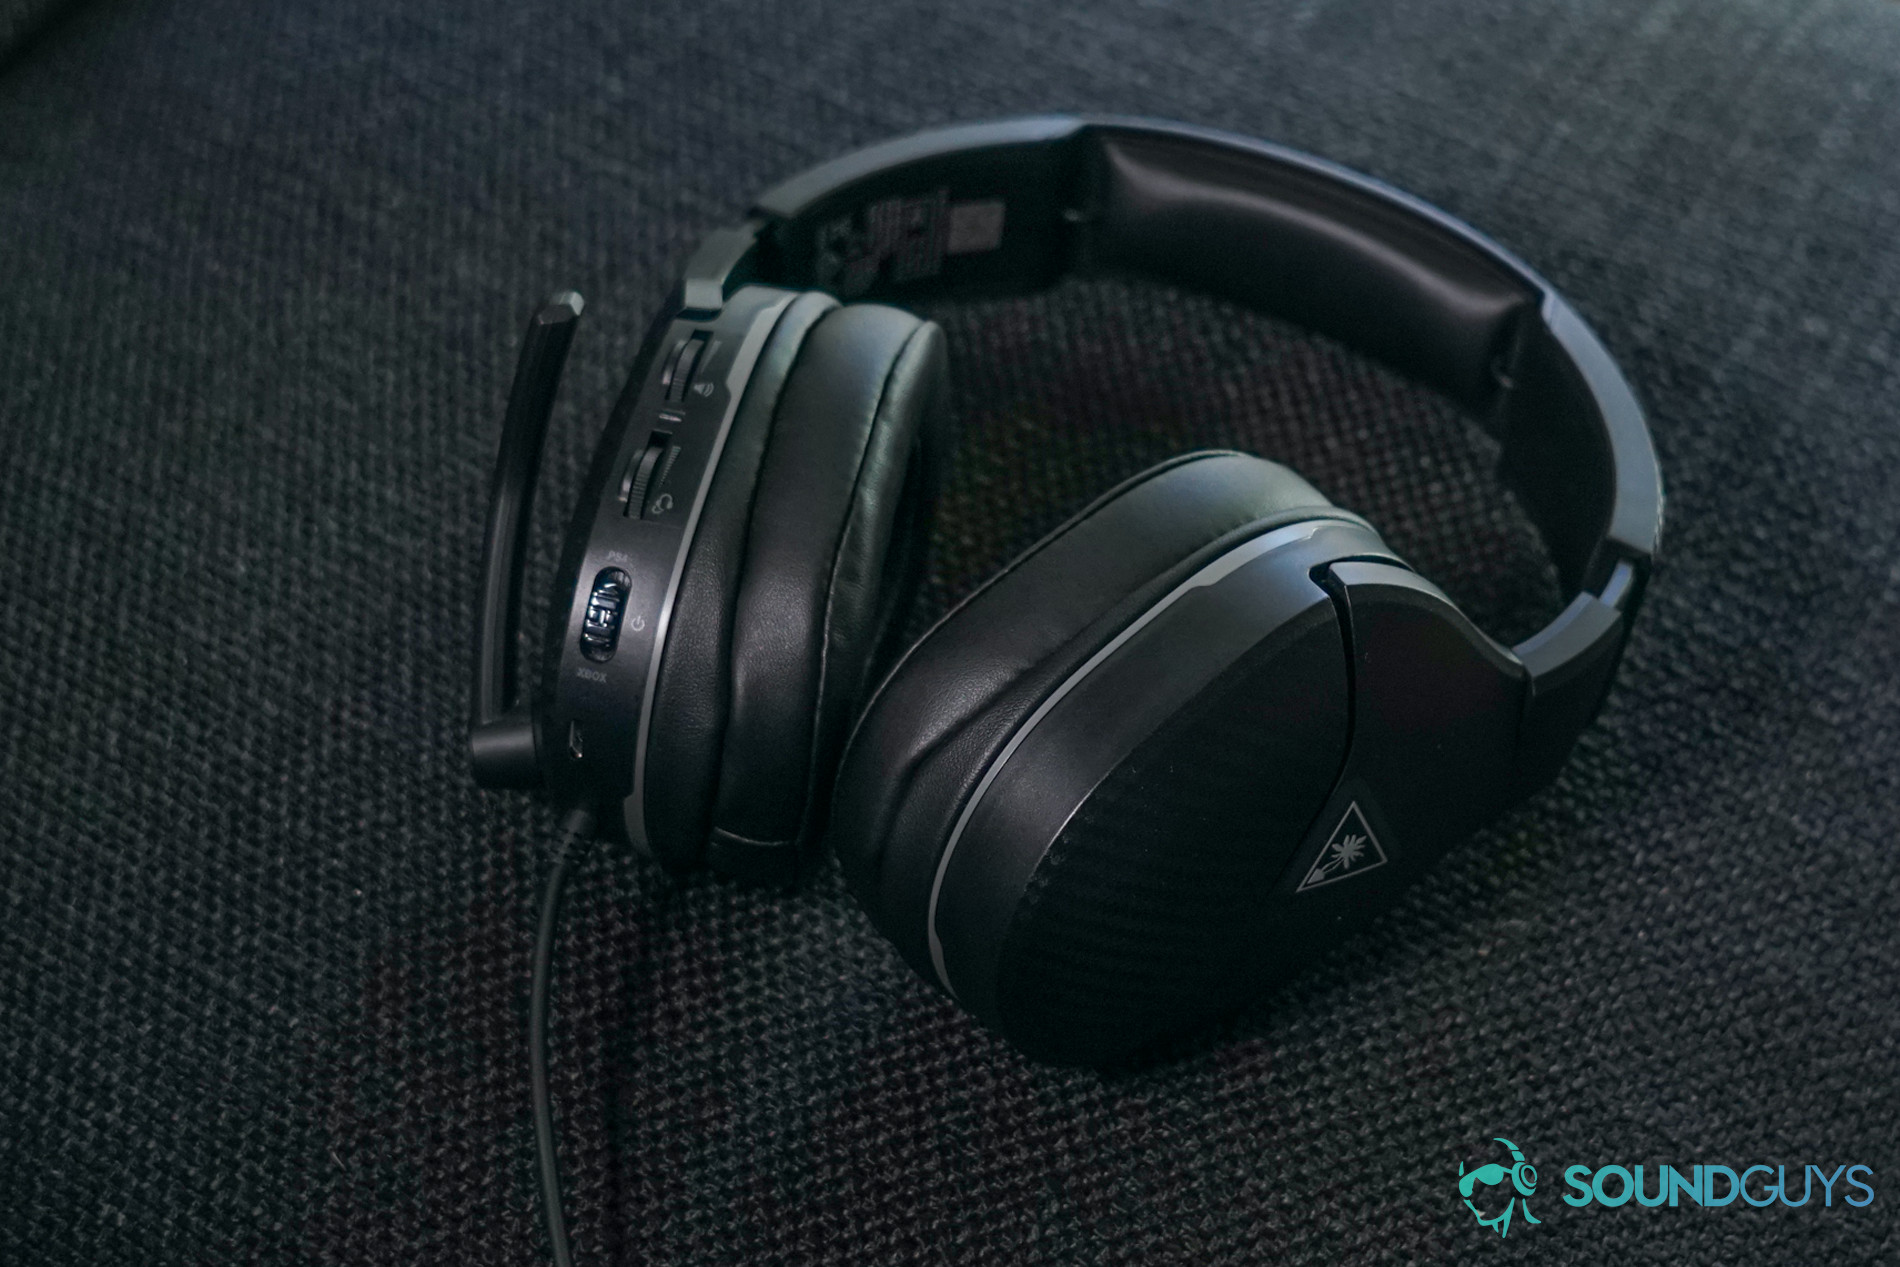 The Turtle Beach Recon 200 sits on a cloth surface with its switches and controls facing up.